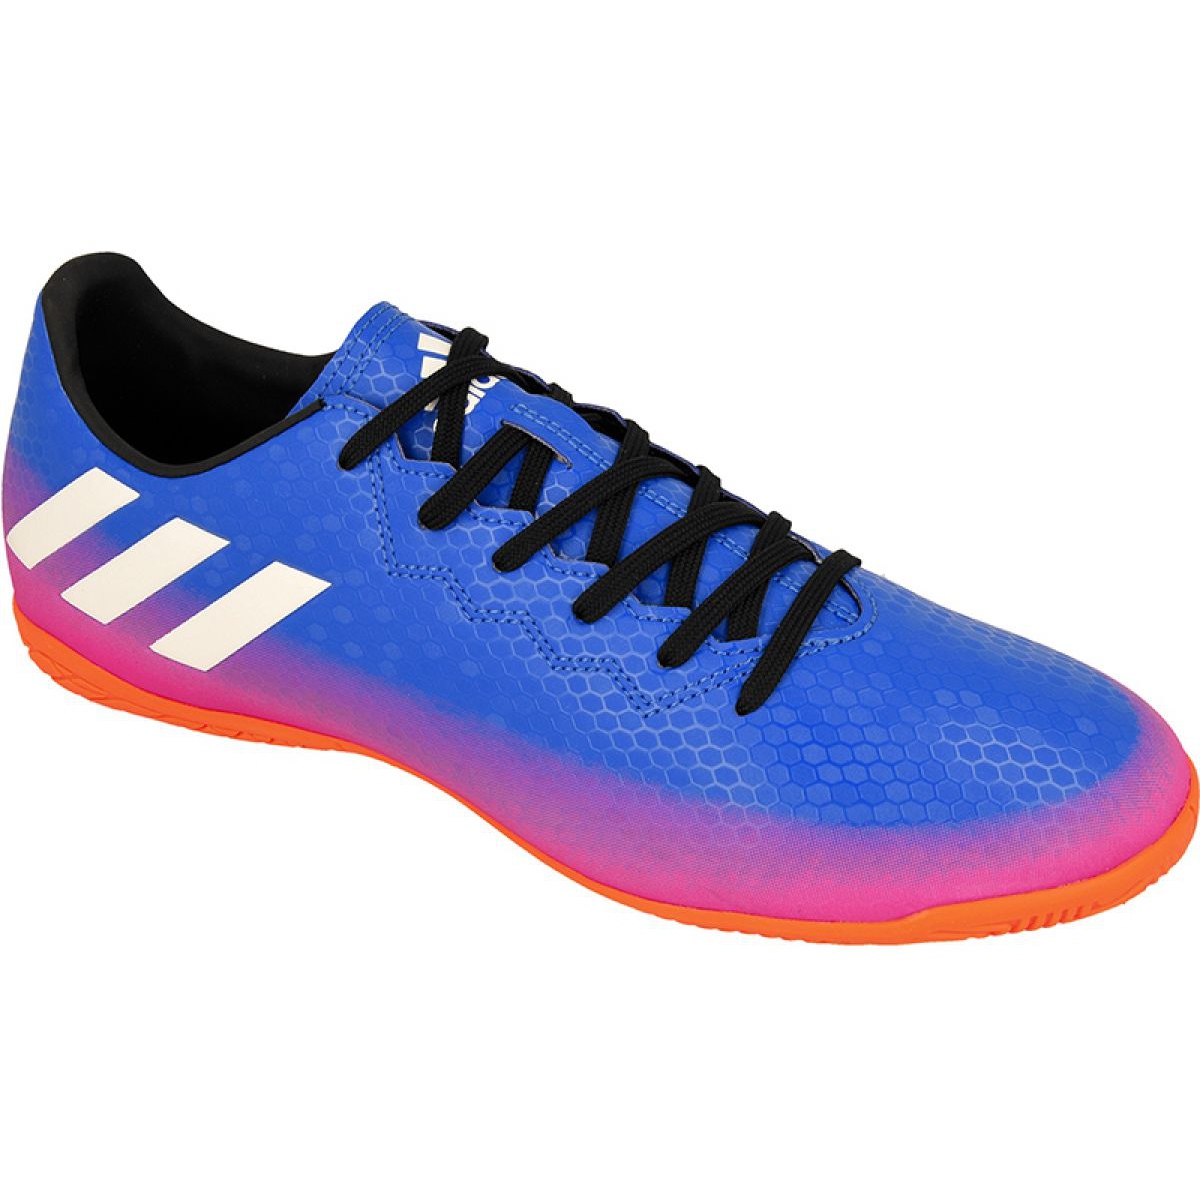 Indoor shoes adidas 16.4 In M BA9027 blue blue - KeeShoes